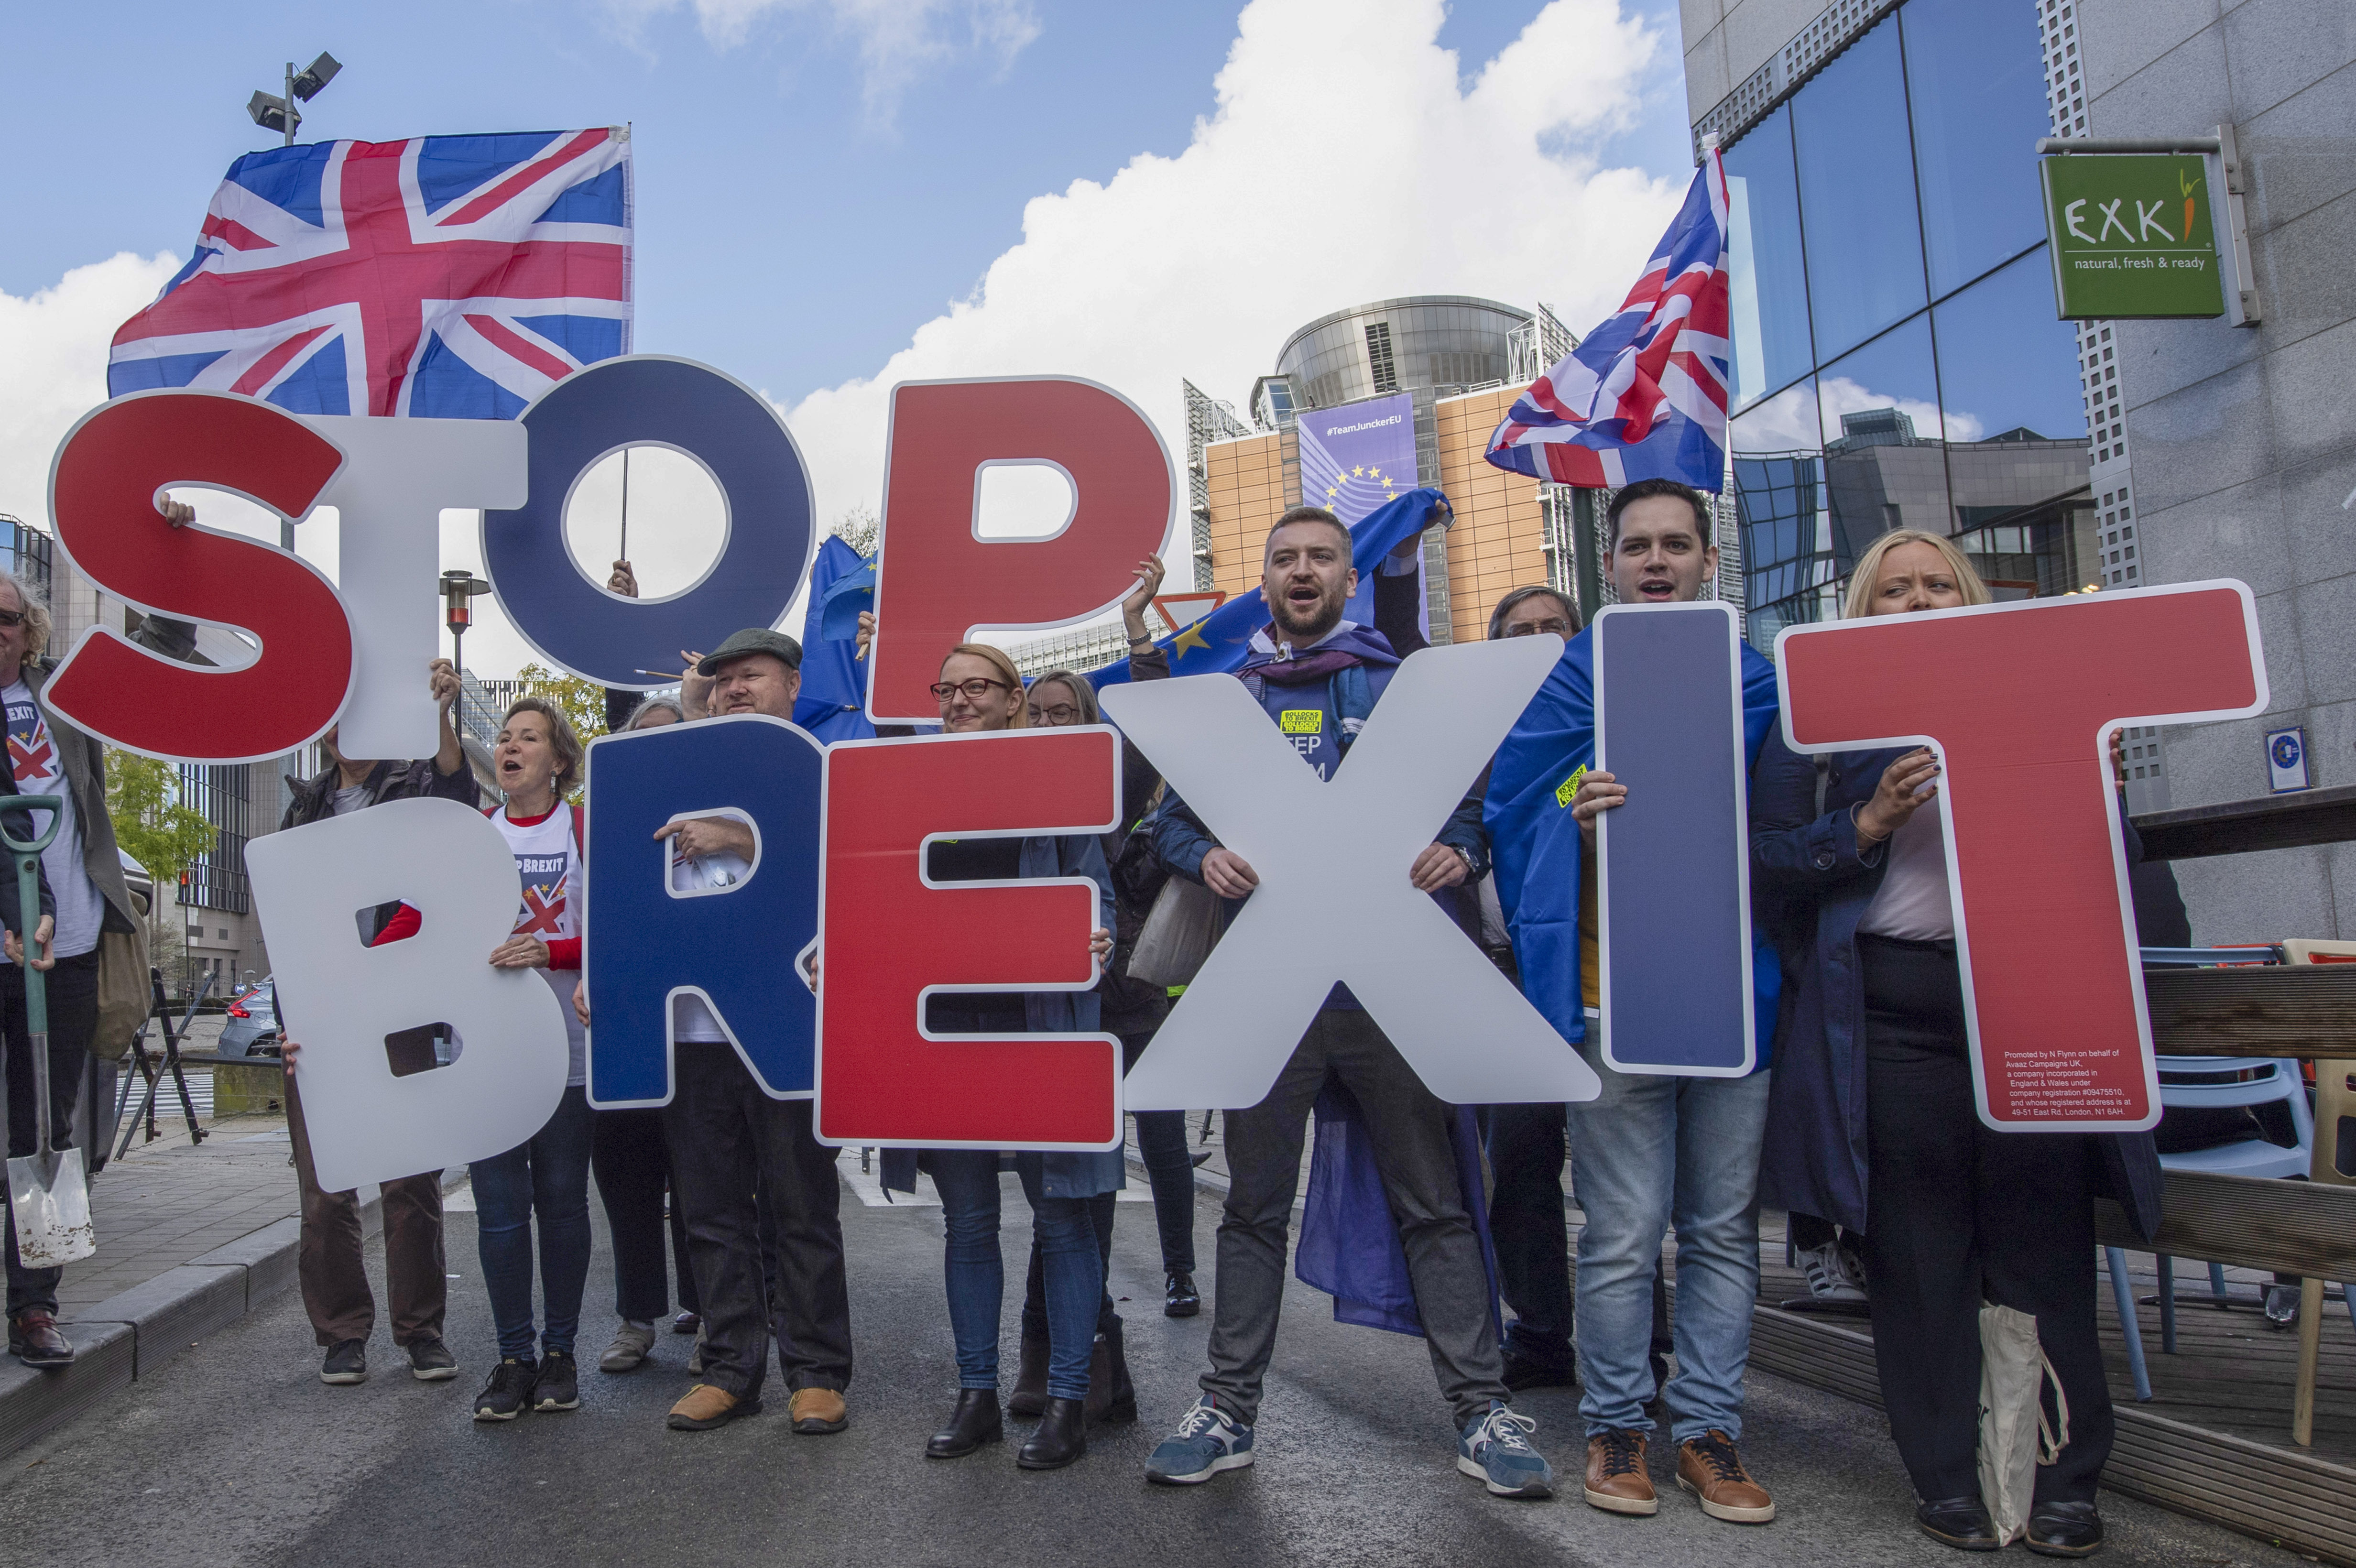 Young people demonstrating with signs "Stop Brexit"